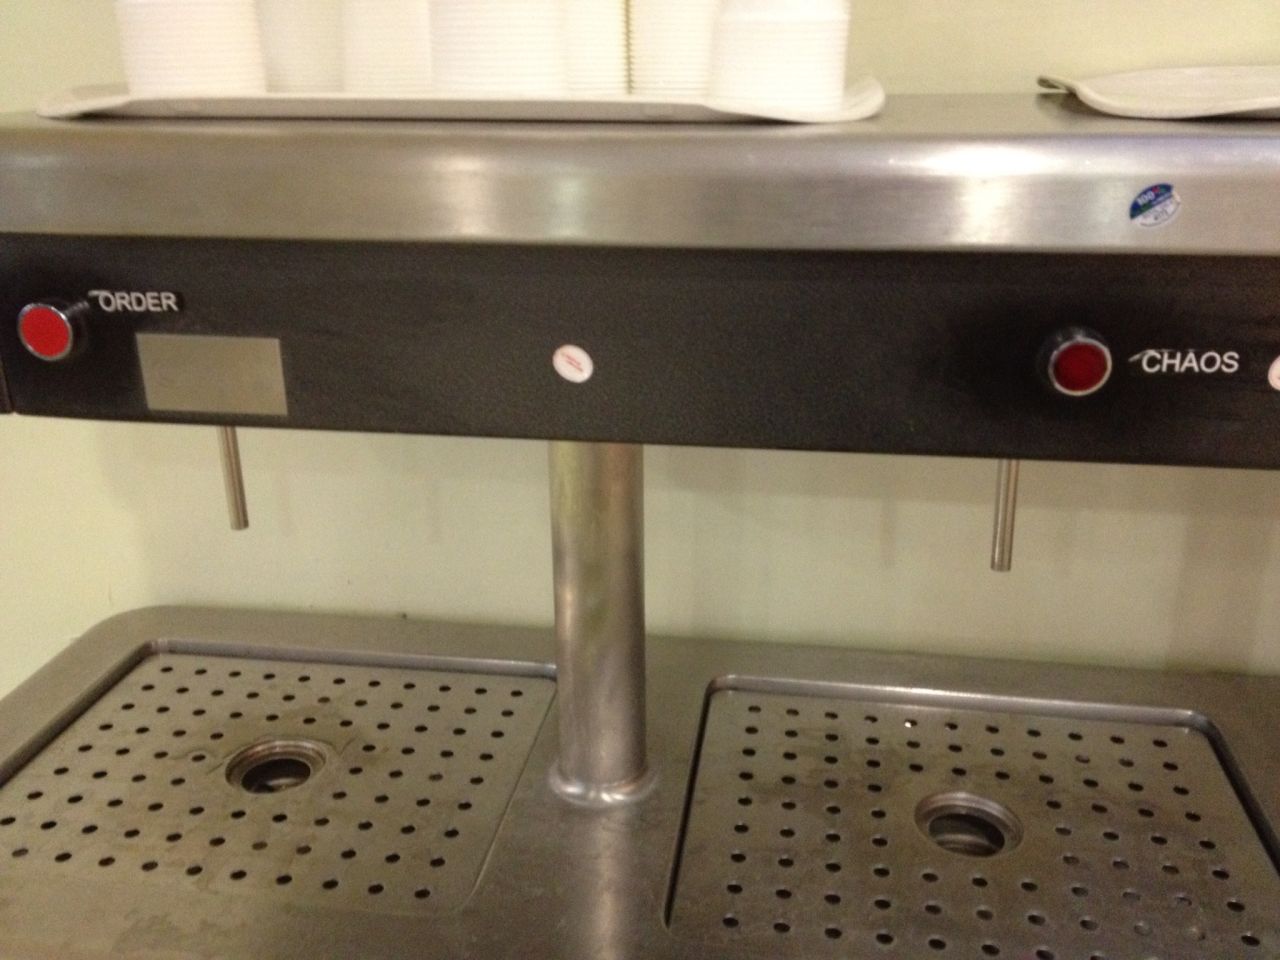 CERN's Restaurant 1 has a water fountain with options such as "order," "chaos" and "self-destruct." CNN's Elizabeth Landau tasted all three and could not detect a difference. 